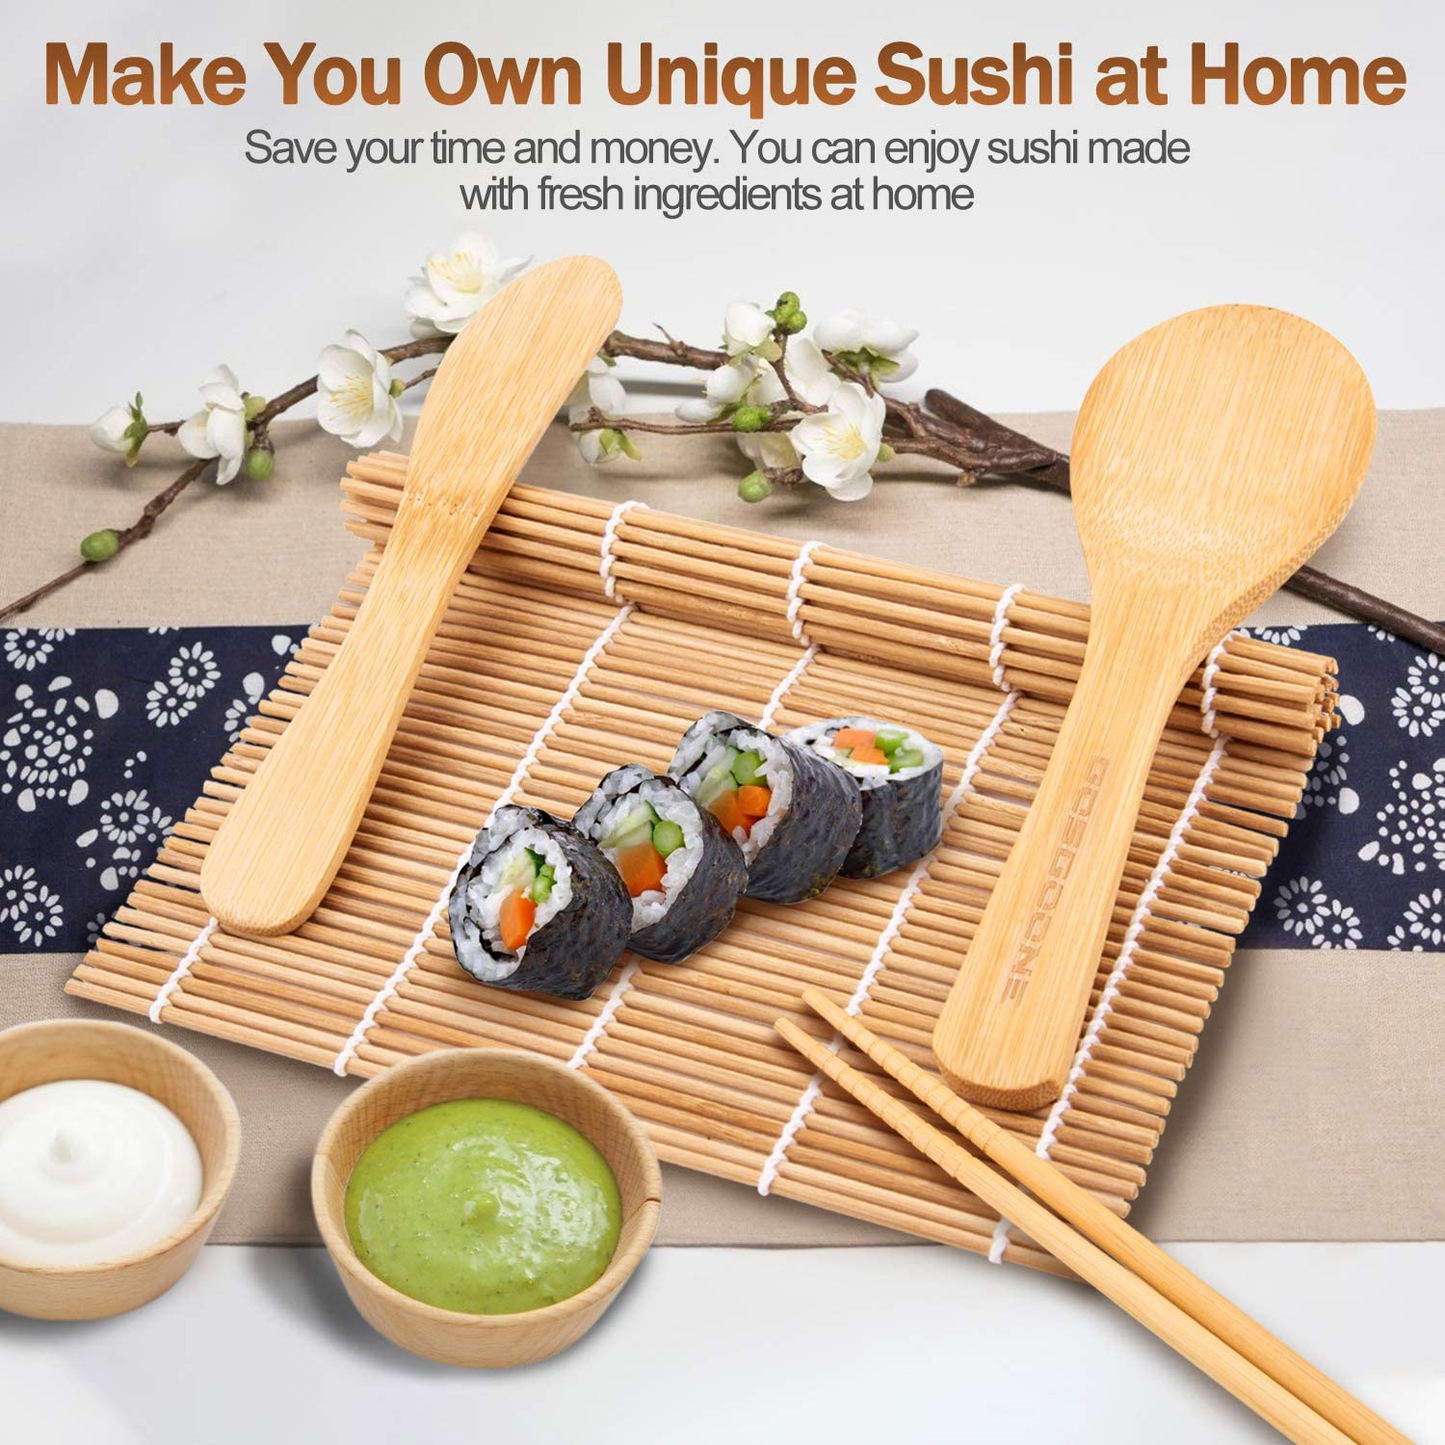 9 PCS Premium Sushi Making Kit, Thicken Bamboo Sushi Mat, Including 2 Sushi Roller, 5 Pairs of Reusable Chopsticks, 1 Paddle, 1 Spreader, Sushi Maker Kit Set Ideal for Beginners and Kids by GOSGOONE